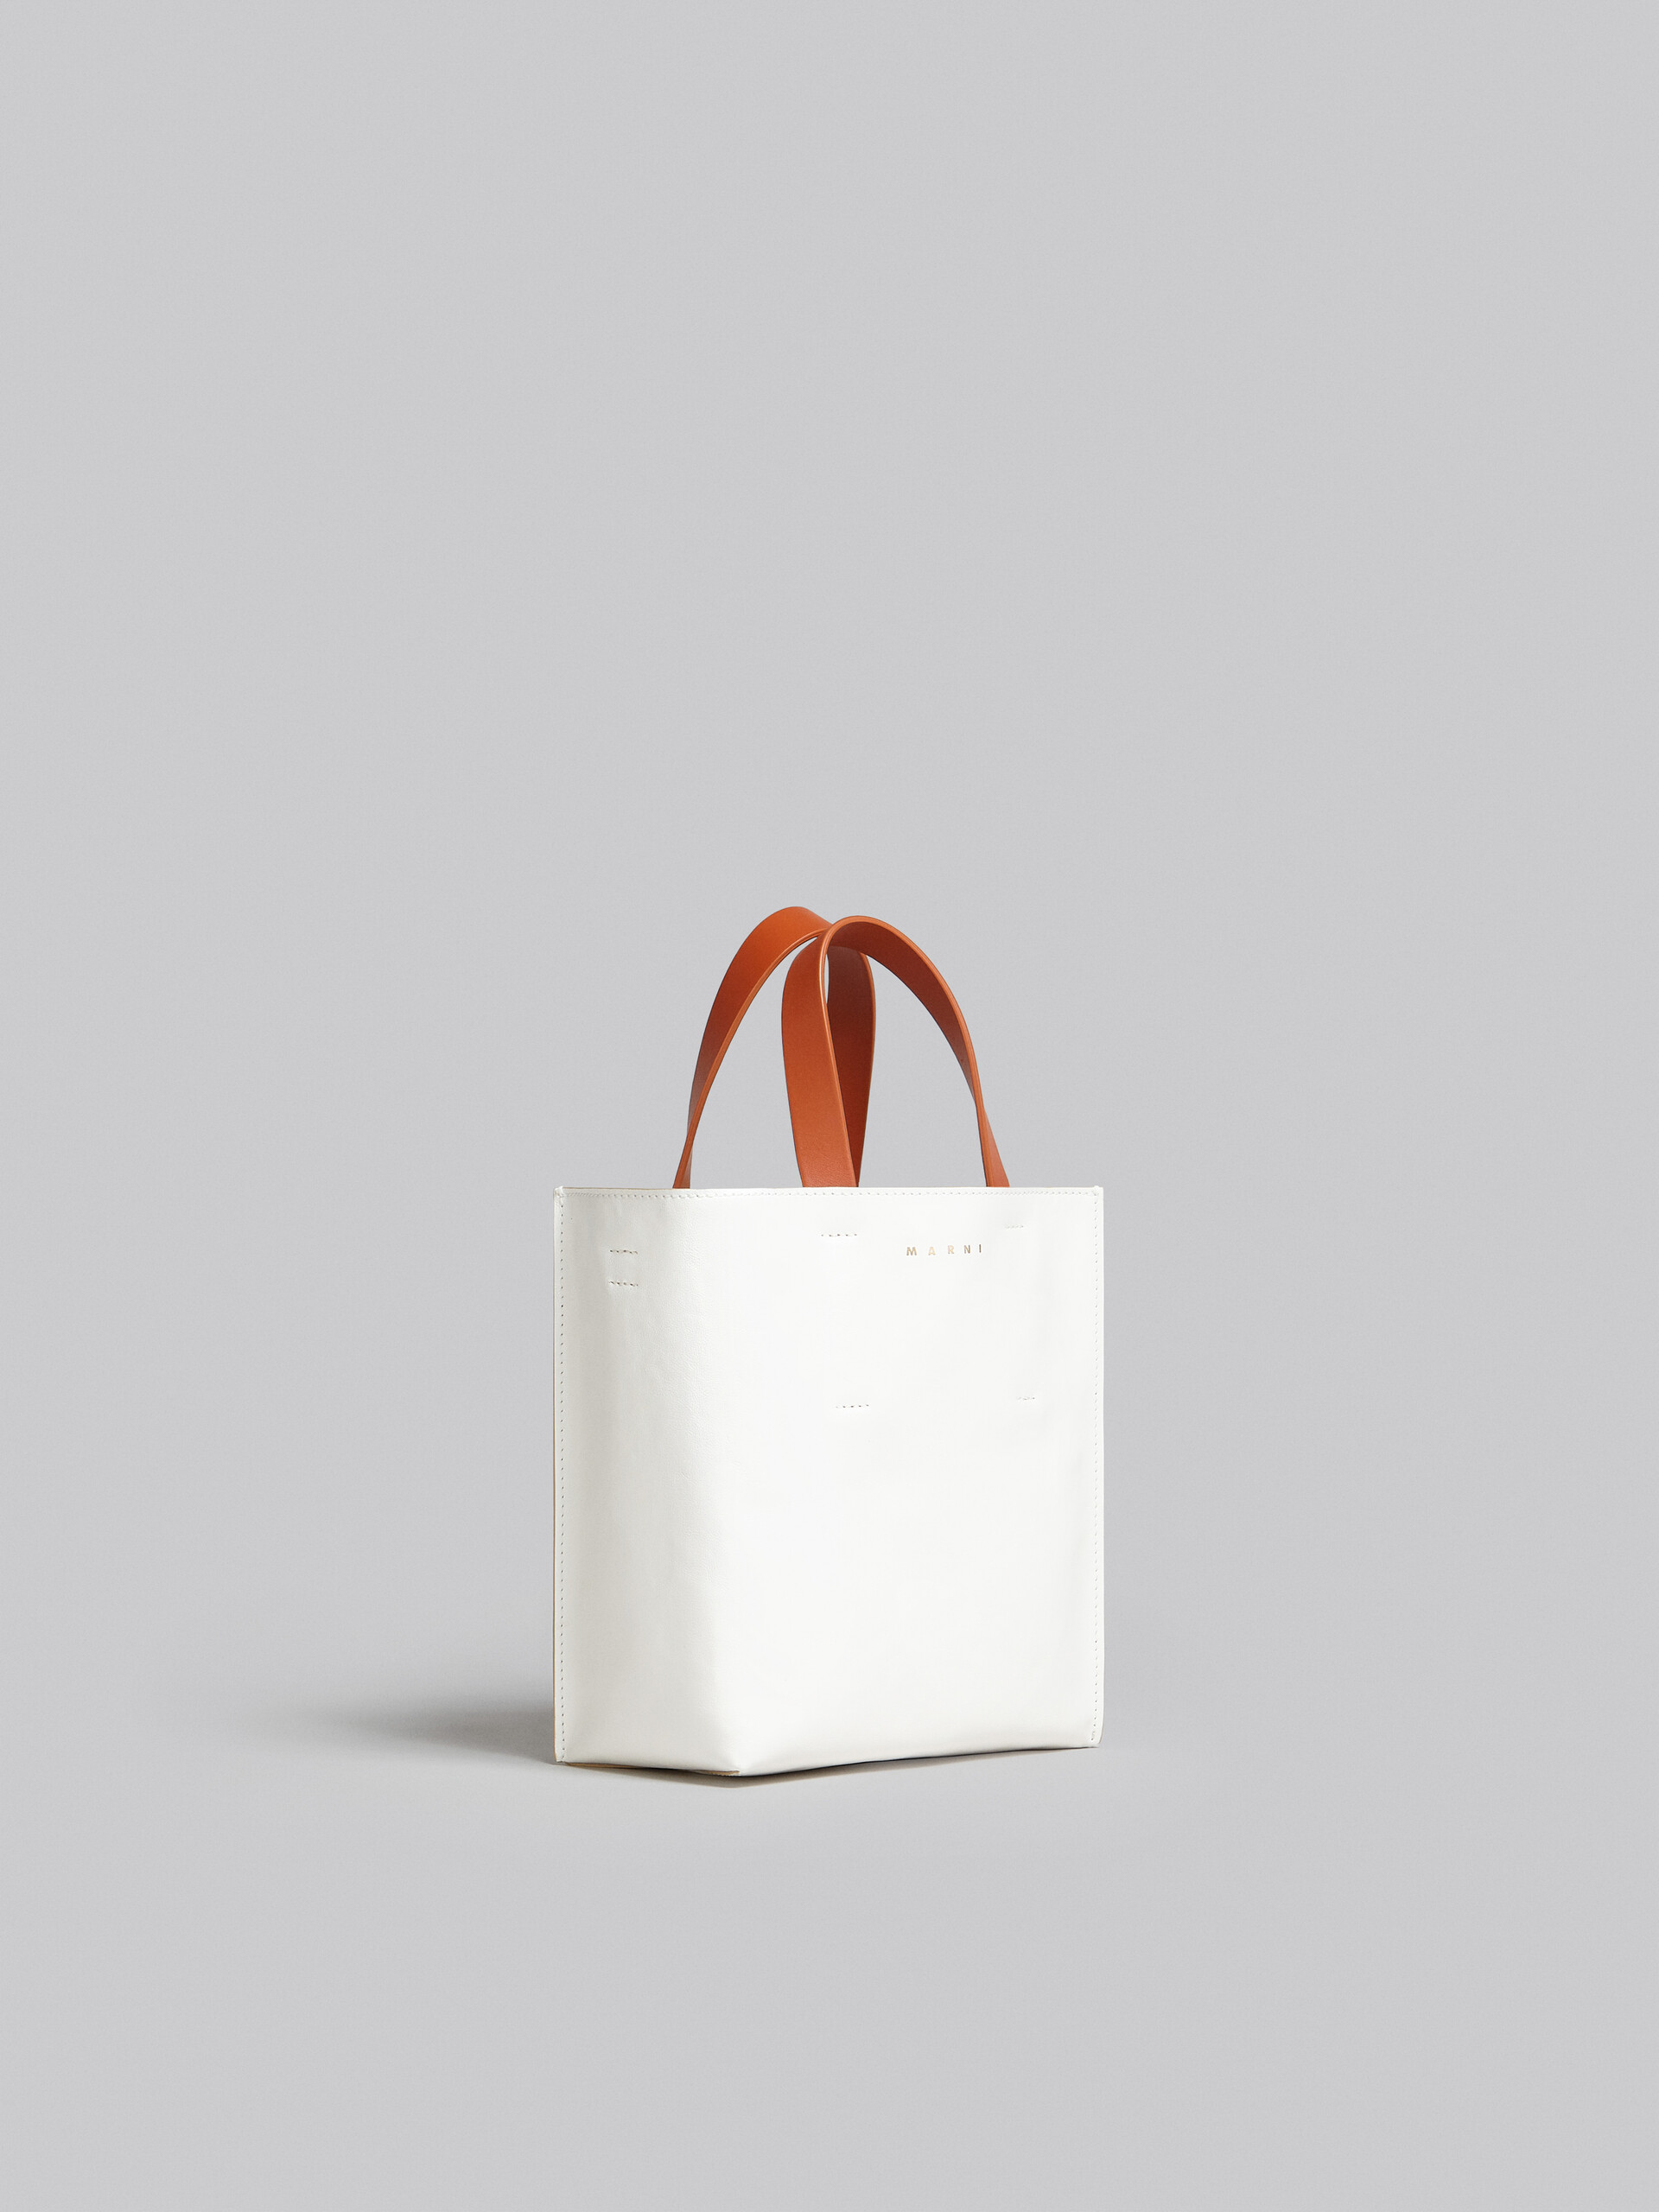 Museo Soft Mini Bag in white light blue and orange leather